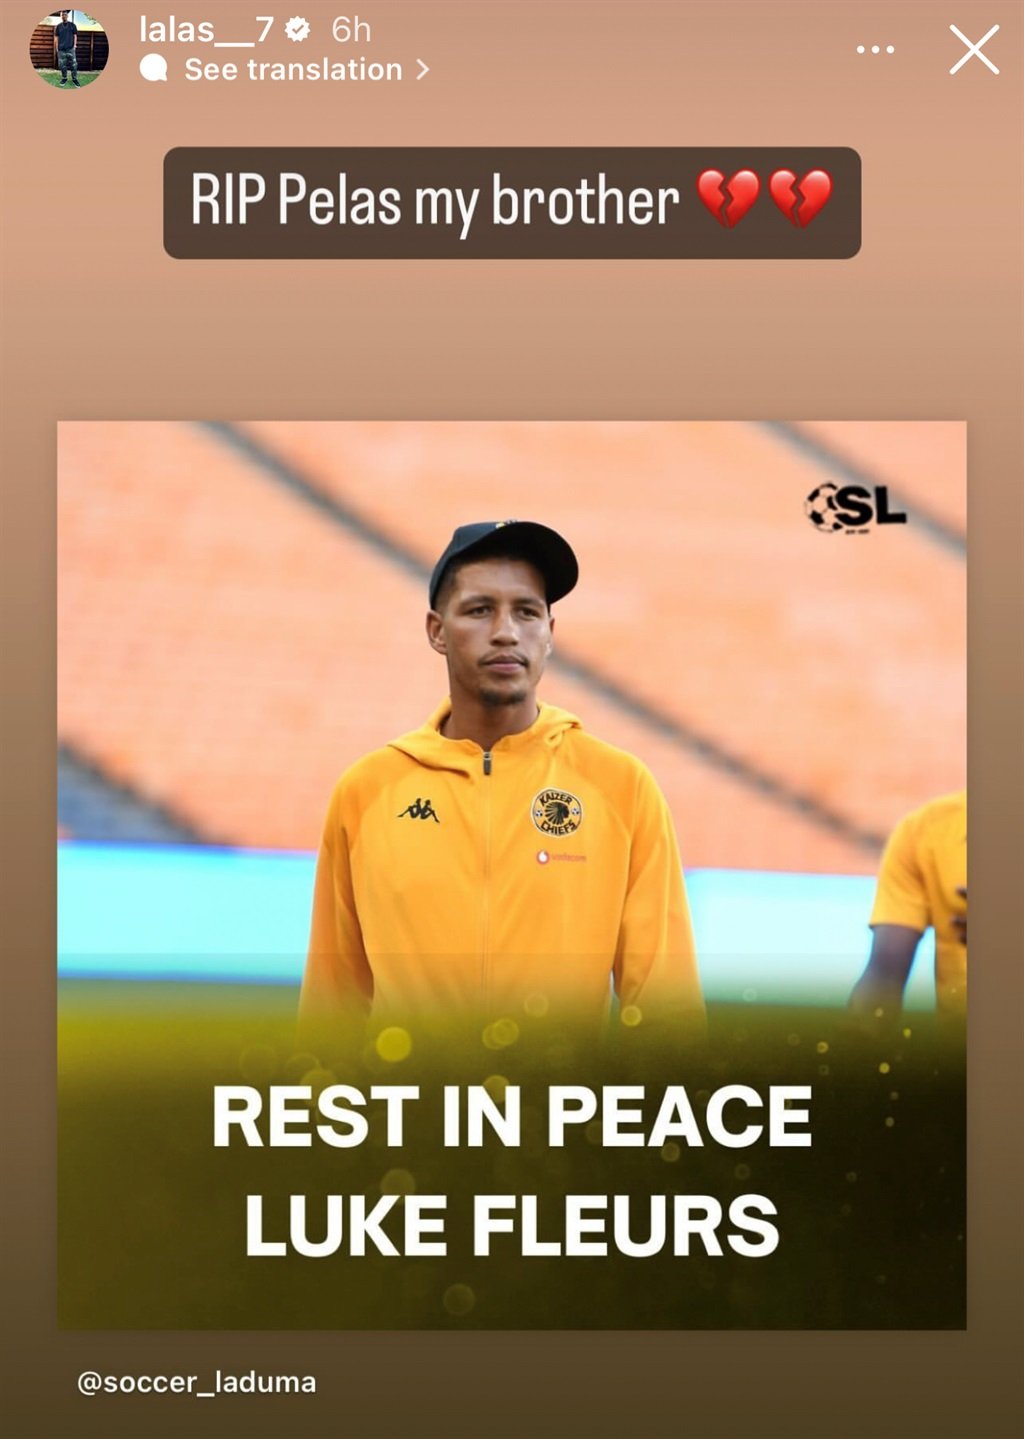 Tributes continue to pour in from players and fans